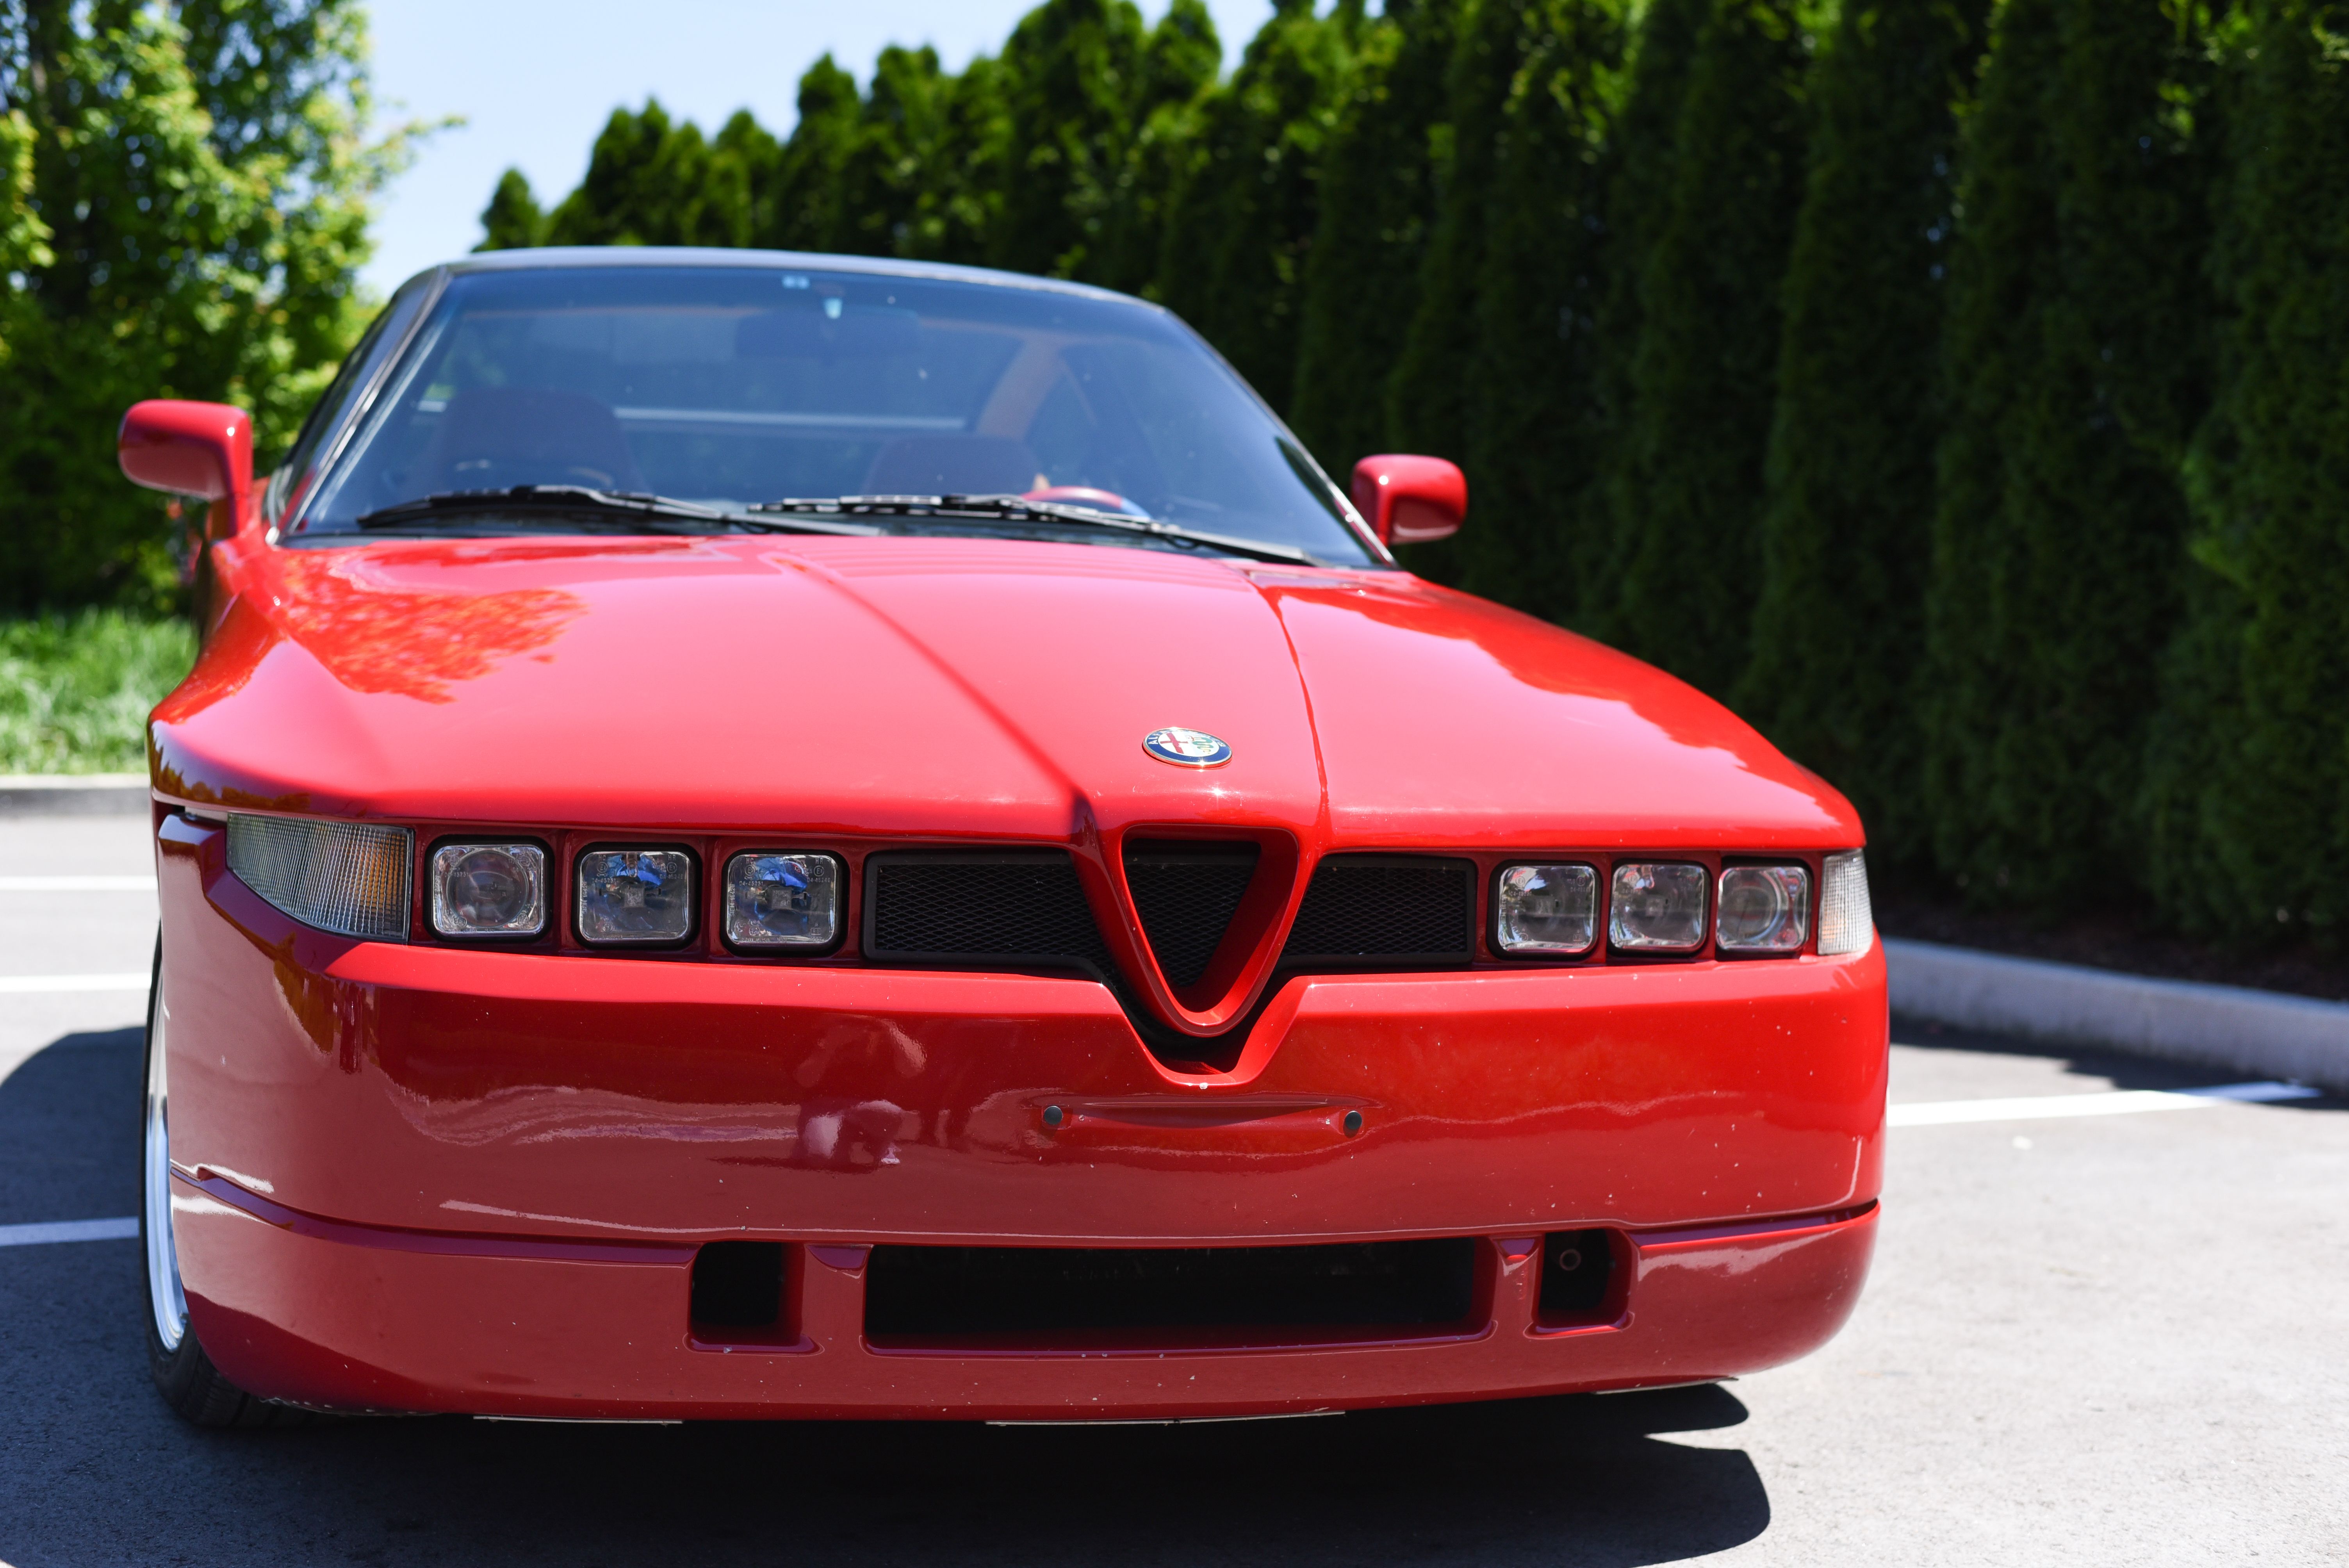 The front of the Alfa Romeo SZ for RiversCars.com Via @GingerlyCaptured